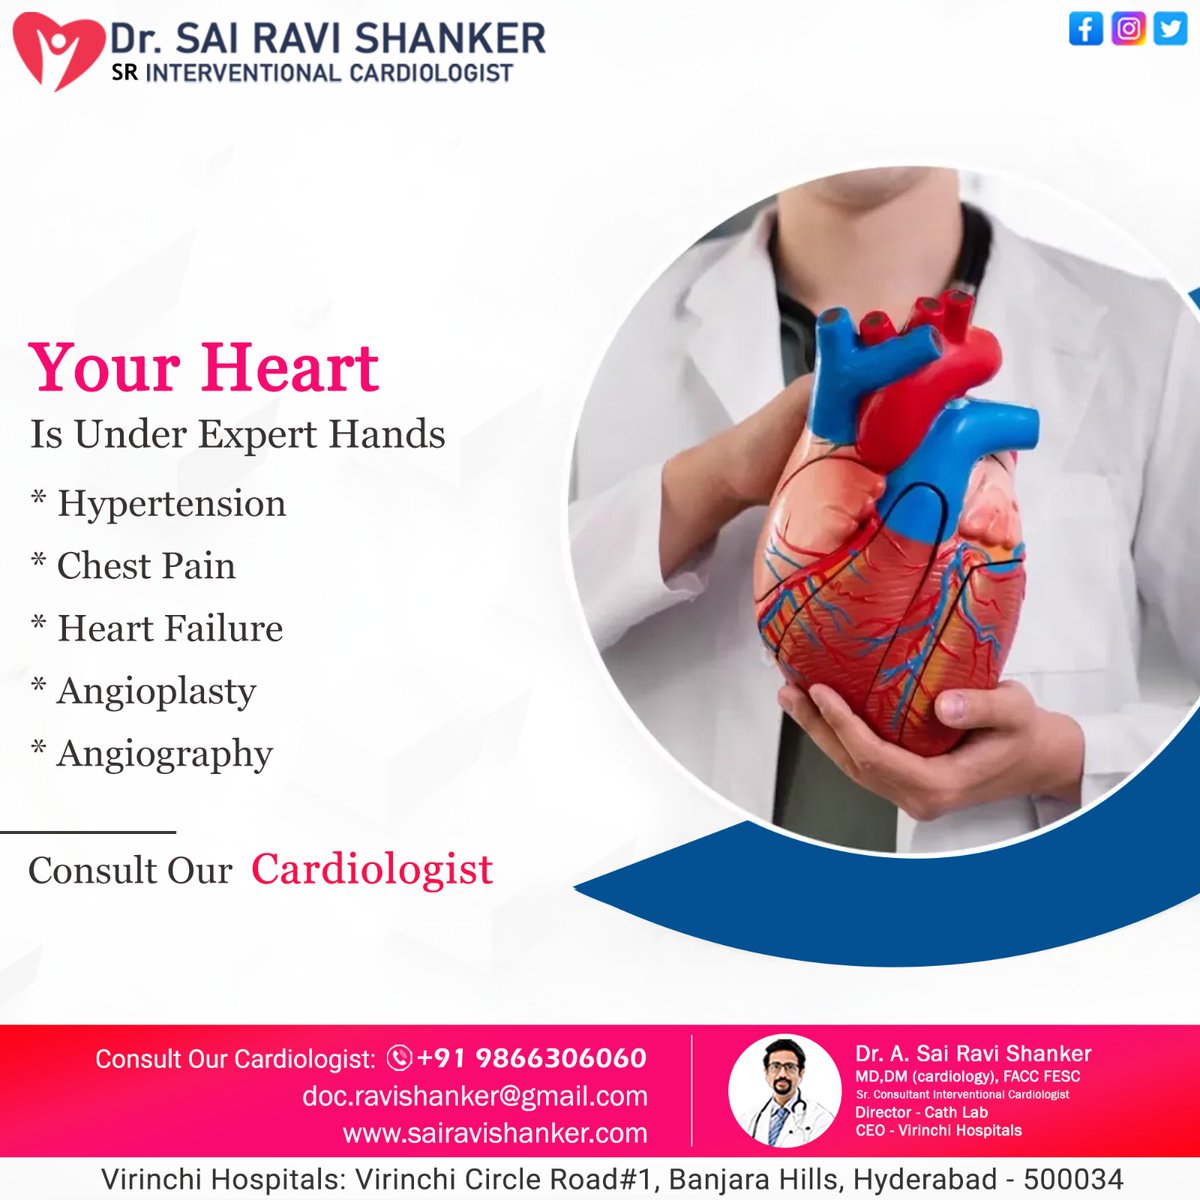 Heart experts handle #highbloodpressure, #chestpain, and #heartproblems. Angioplasty and angiography help #diagnose and #treat heart issues. Spread awareness about heart health.

#Drsairavishankar #cardiologist #consultantcardiologist #cardiologydoctor #InterventionalCardiologist